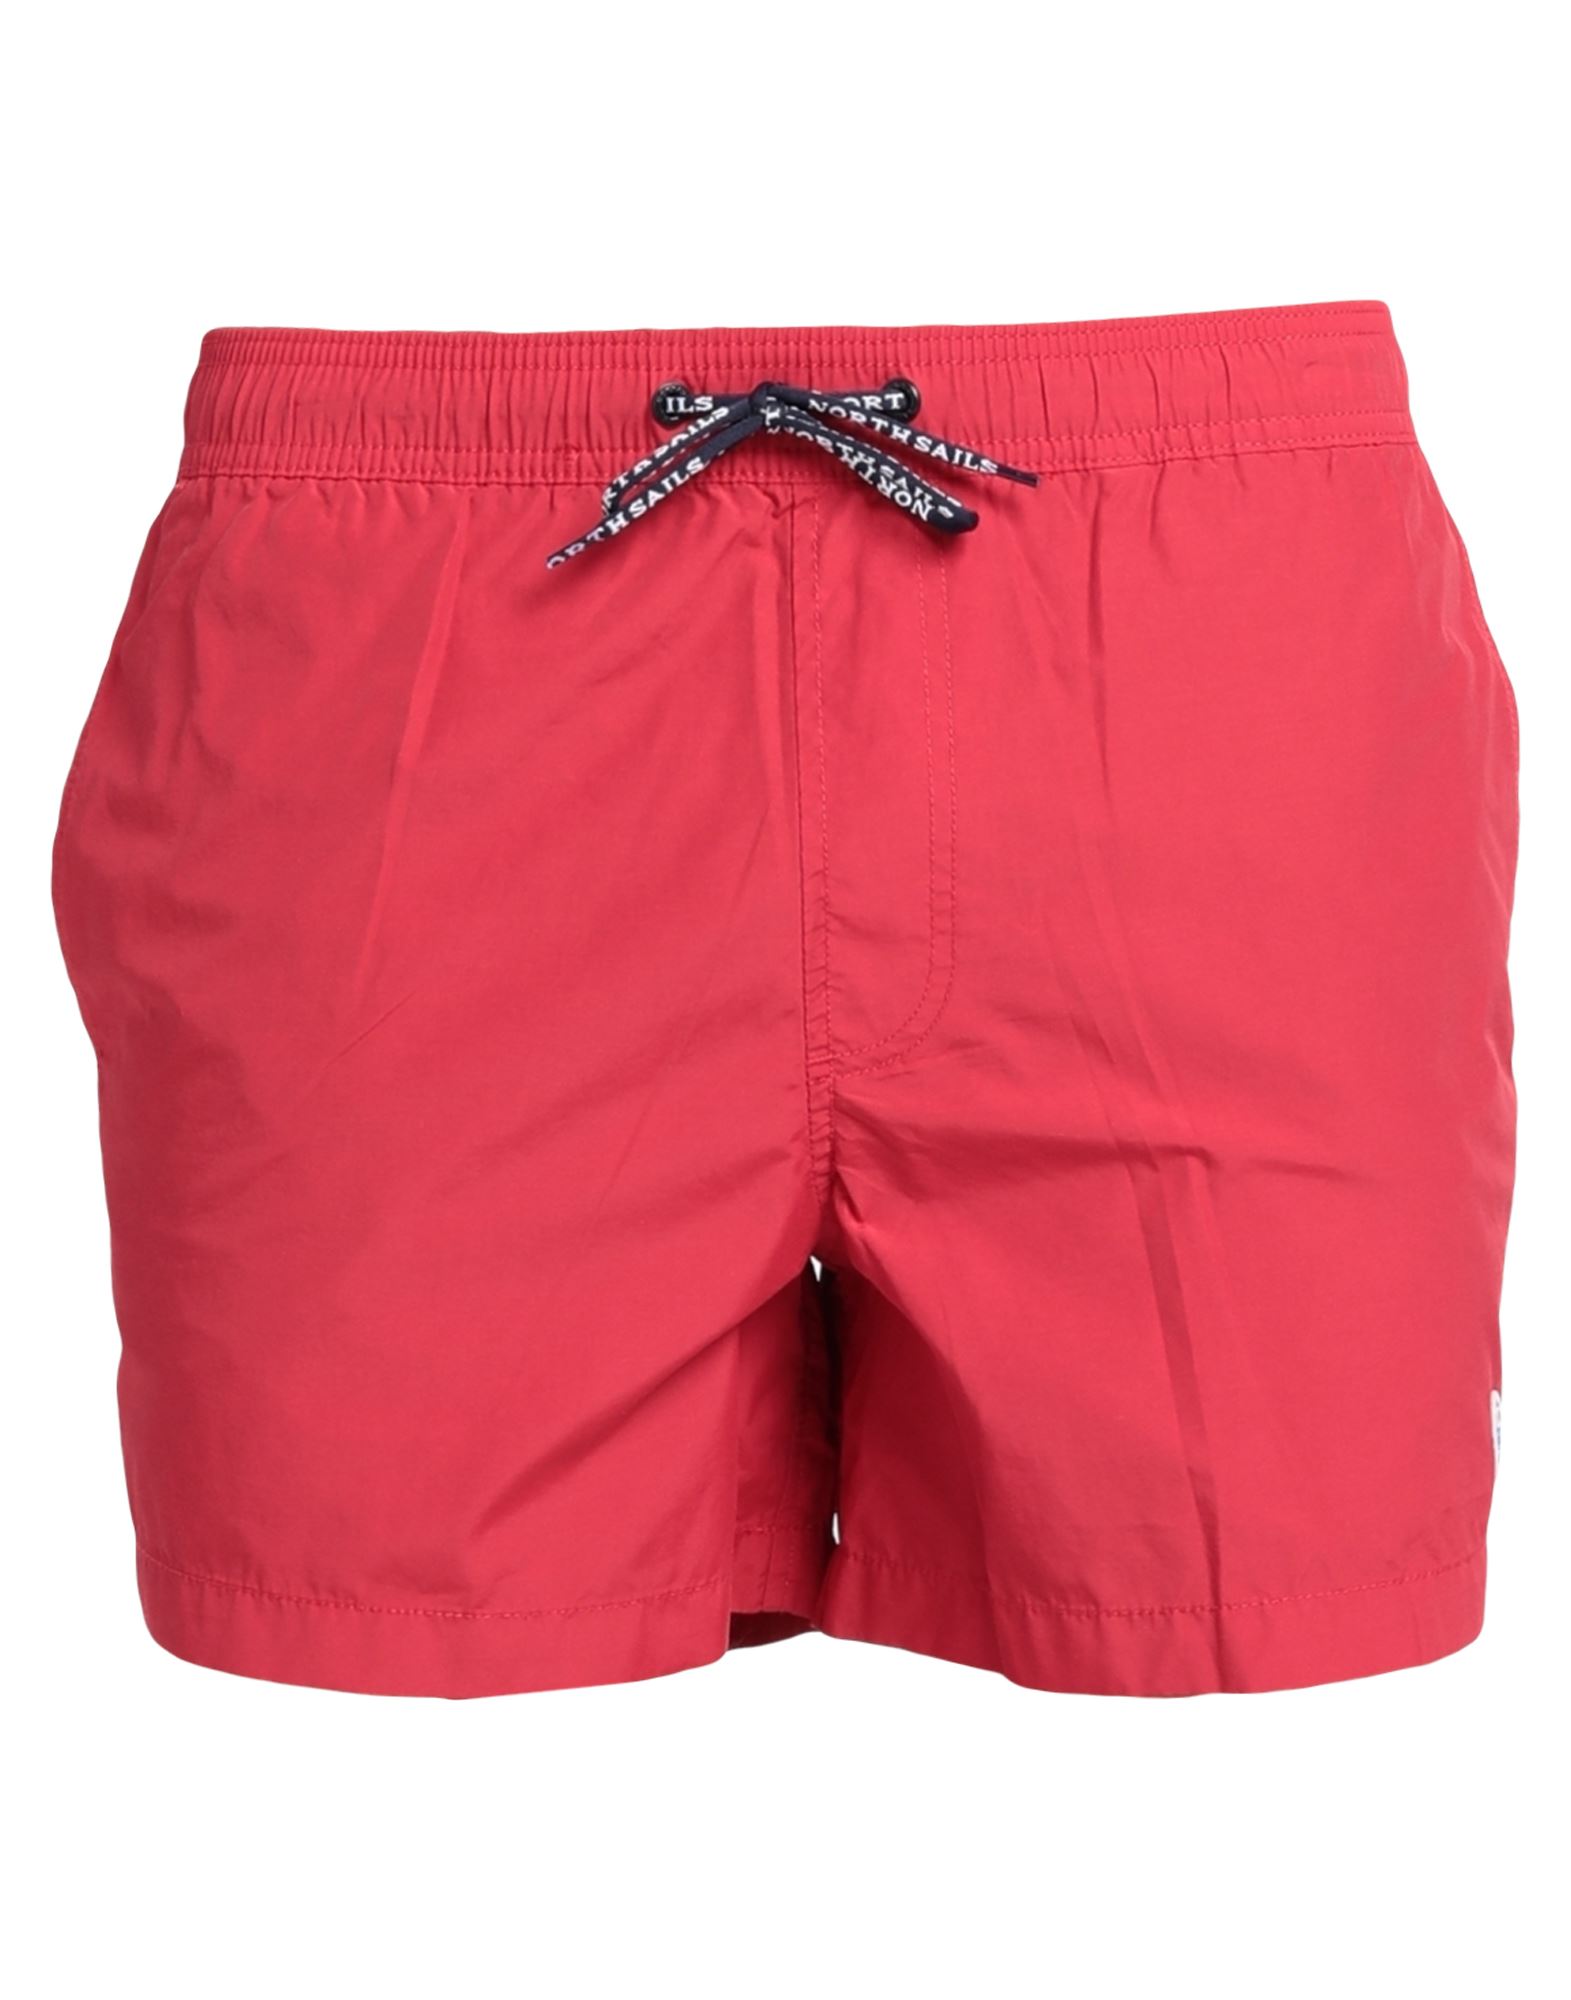 North Sails Swim Trunks In Red